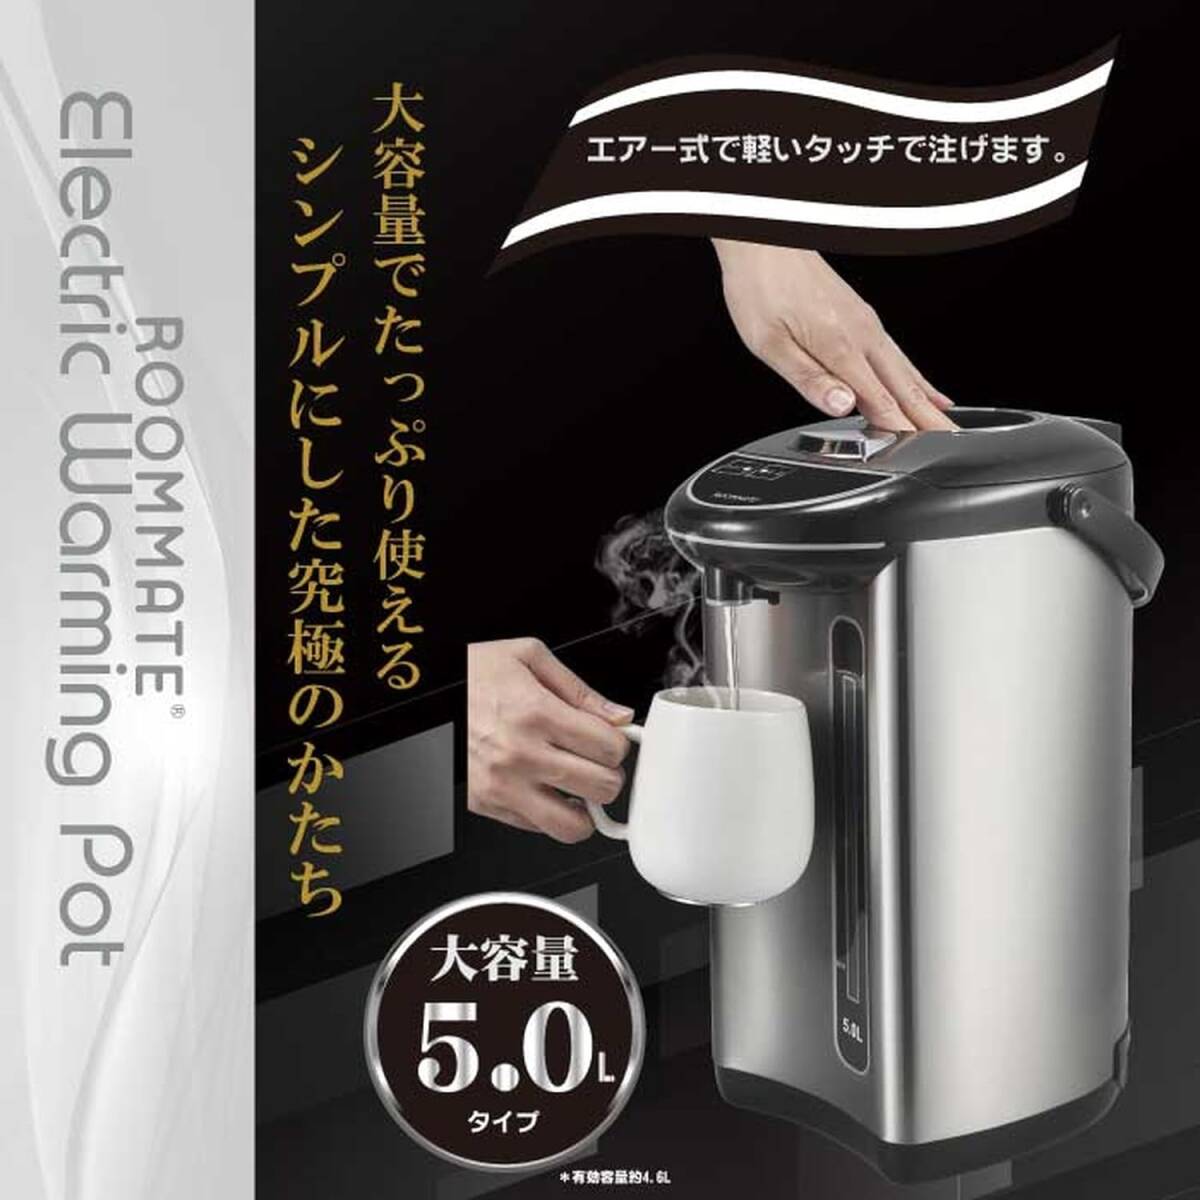  free shipping!! hot water dispenser new goods unused goods 5.0L type!.. equipped 